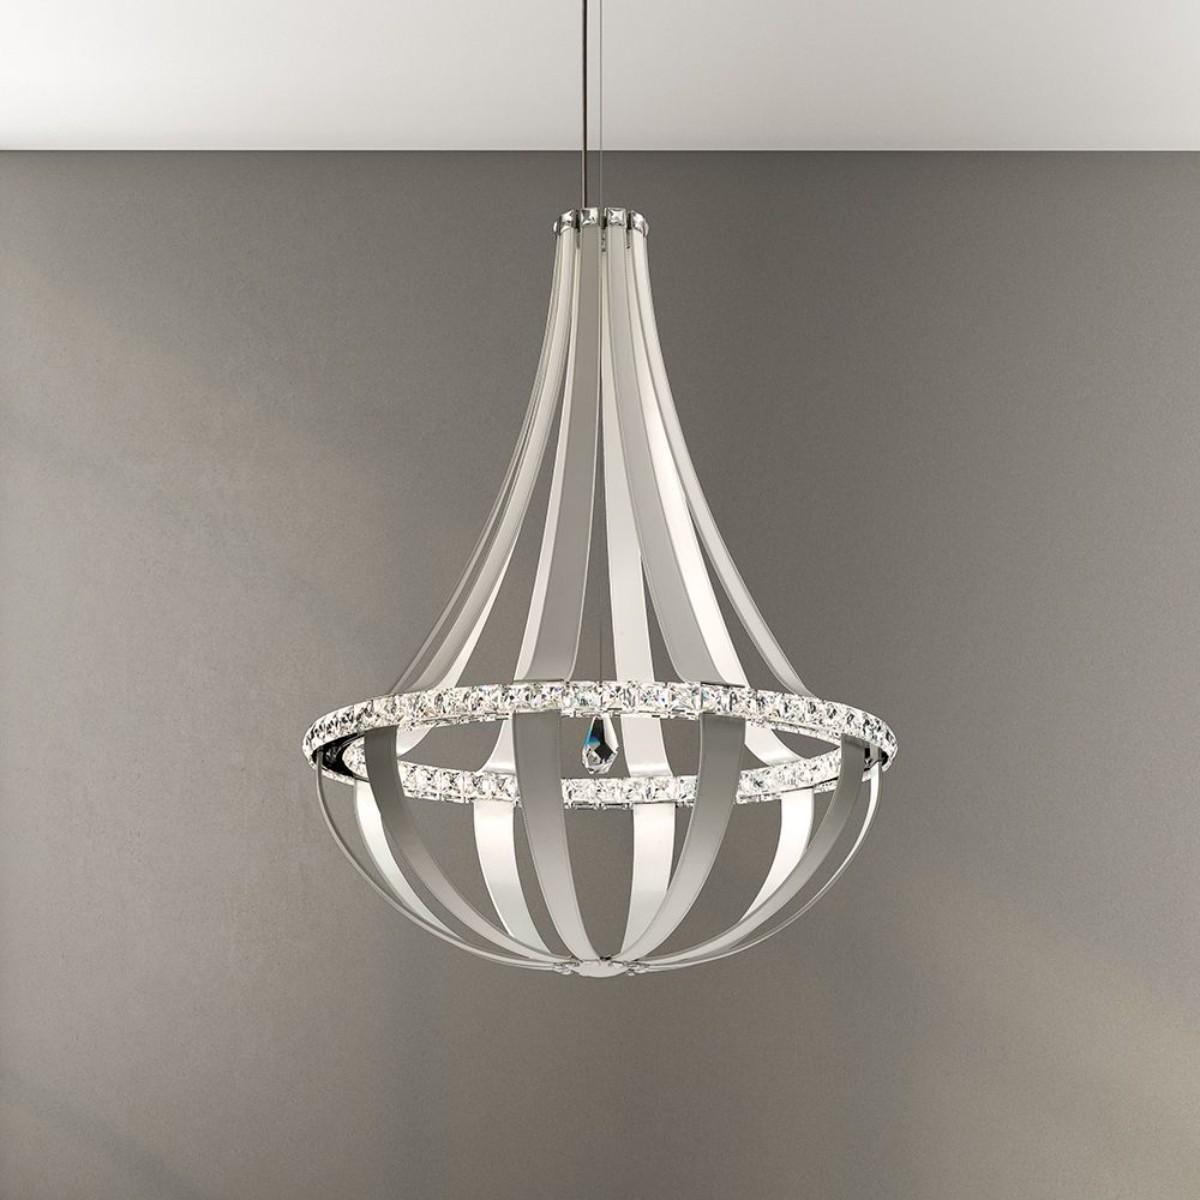 Crystal Empire 45 inch LED Pendant Light with Clear Swarovski Crystals - Bees Lighting